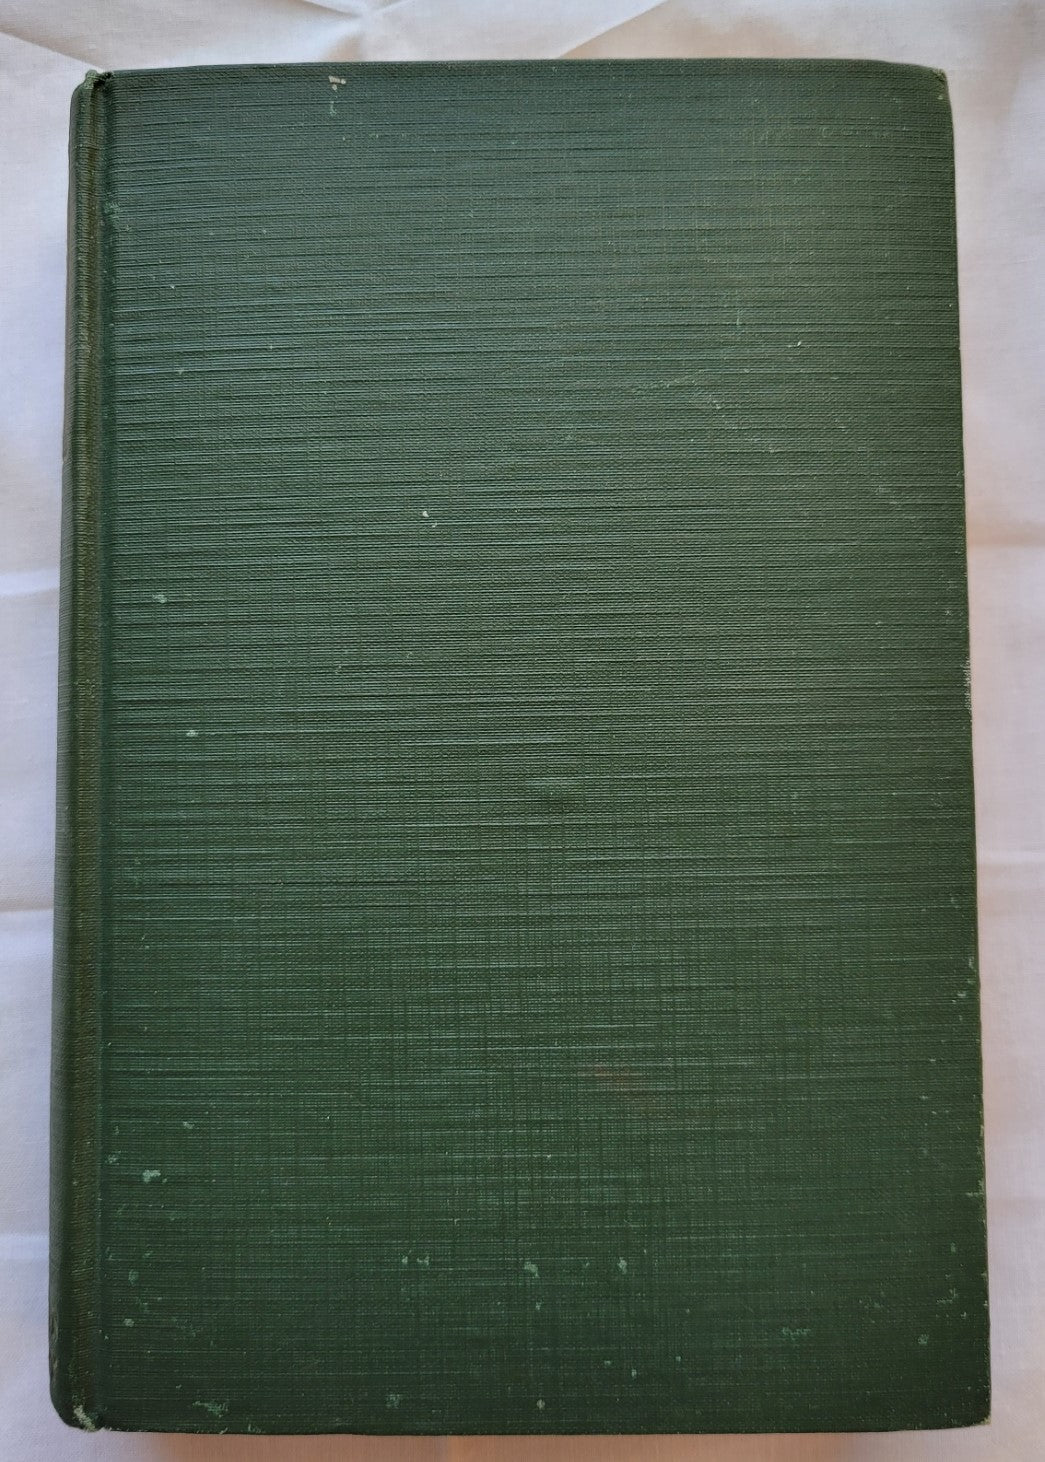 Vintage book for sale, "One Increasing Purpose" by A. S. M. Hutchinson, published by Little, Brown and Company, 1925.  View of front cover.